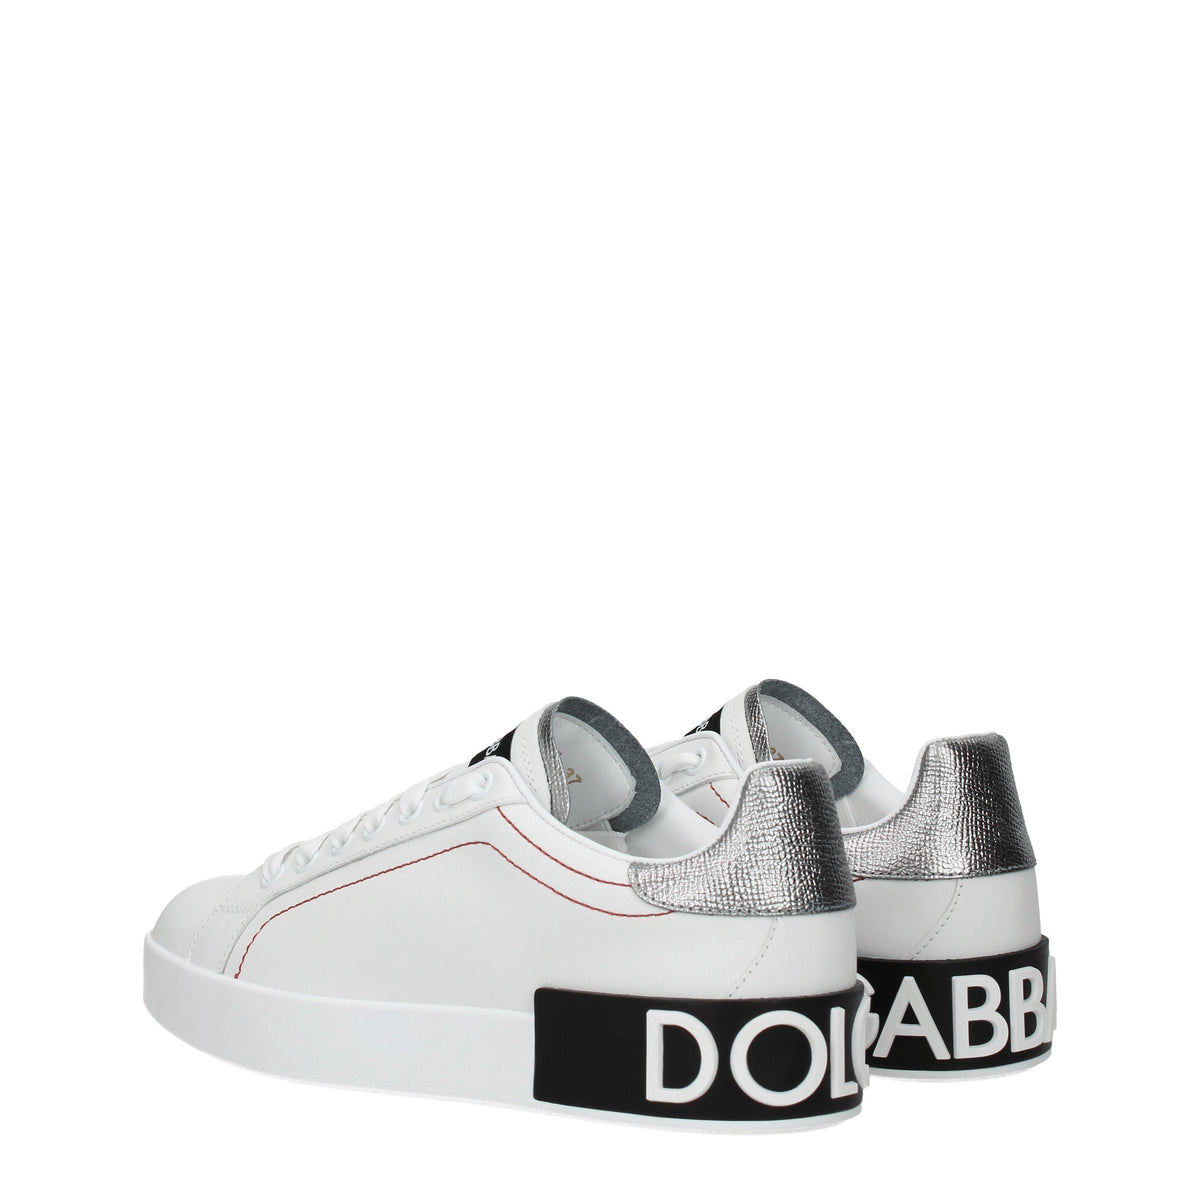 Dolce&Gabbana Sneakers Donna Pelle Bianco Argento